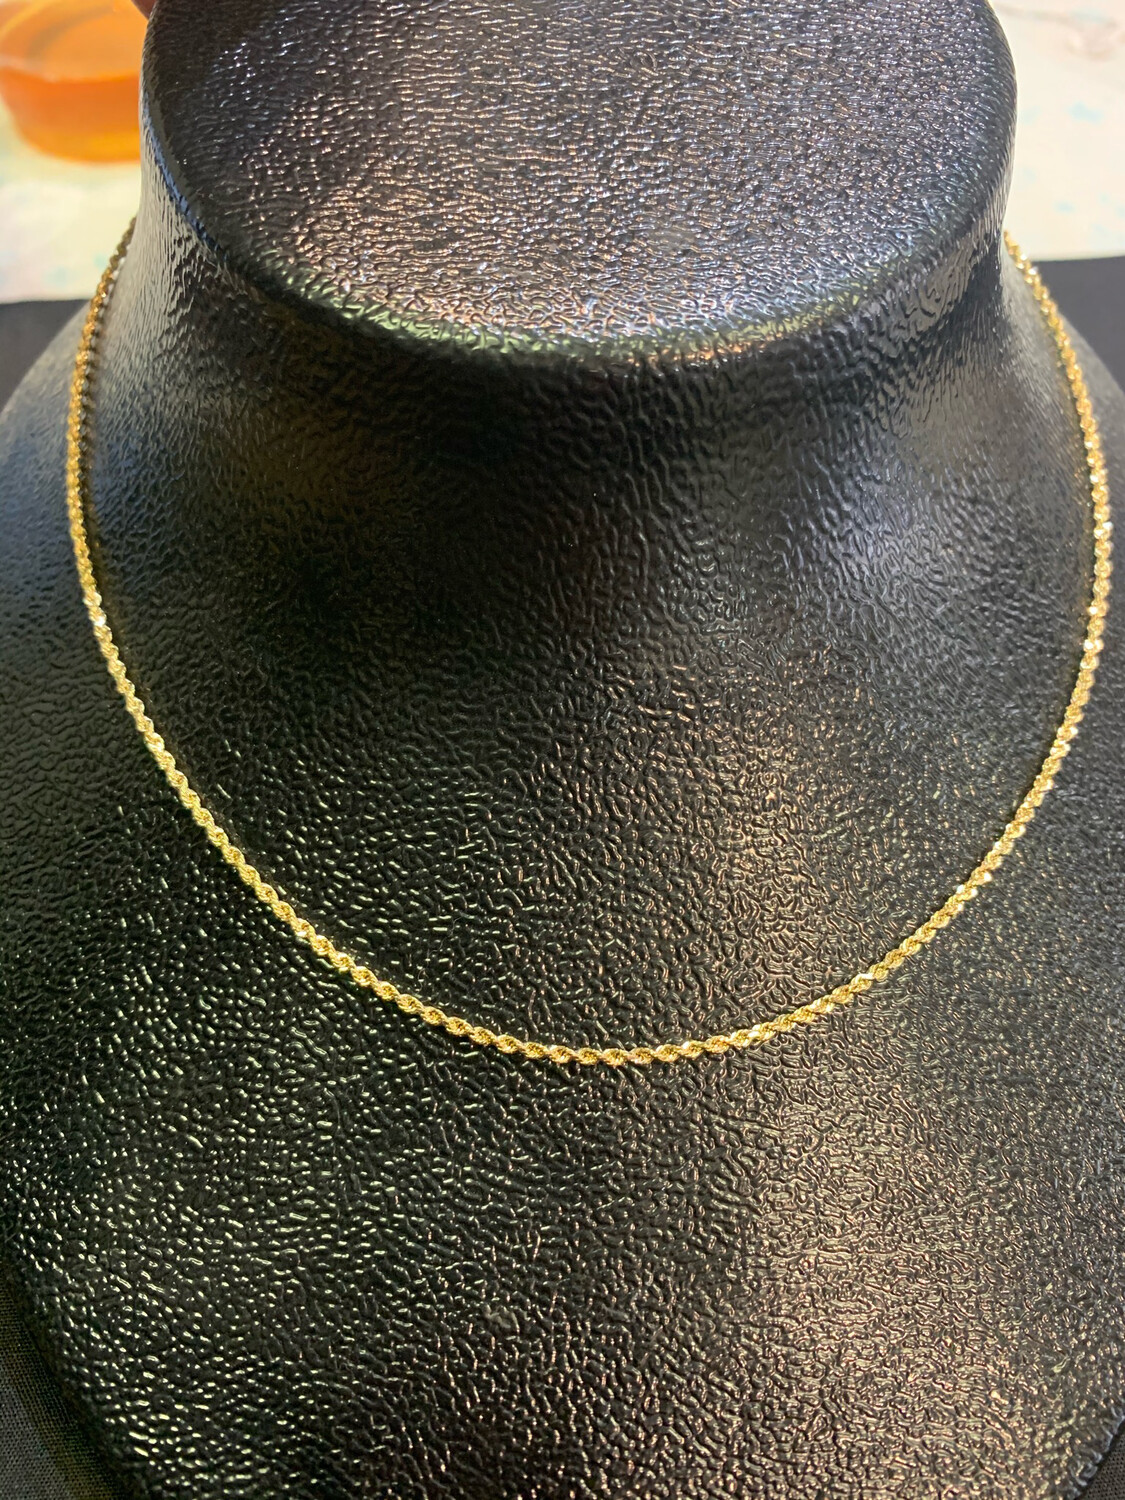 16 “ Gold Chain Diamond Cut Rope Chain Really Sparkles